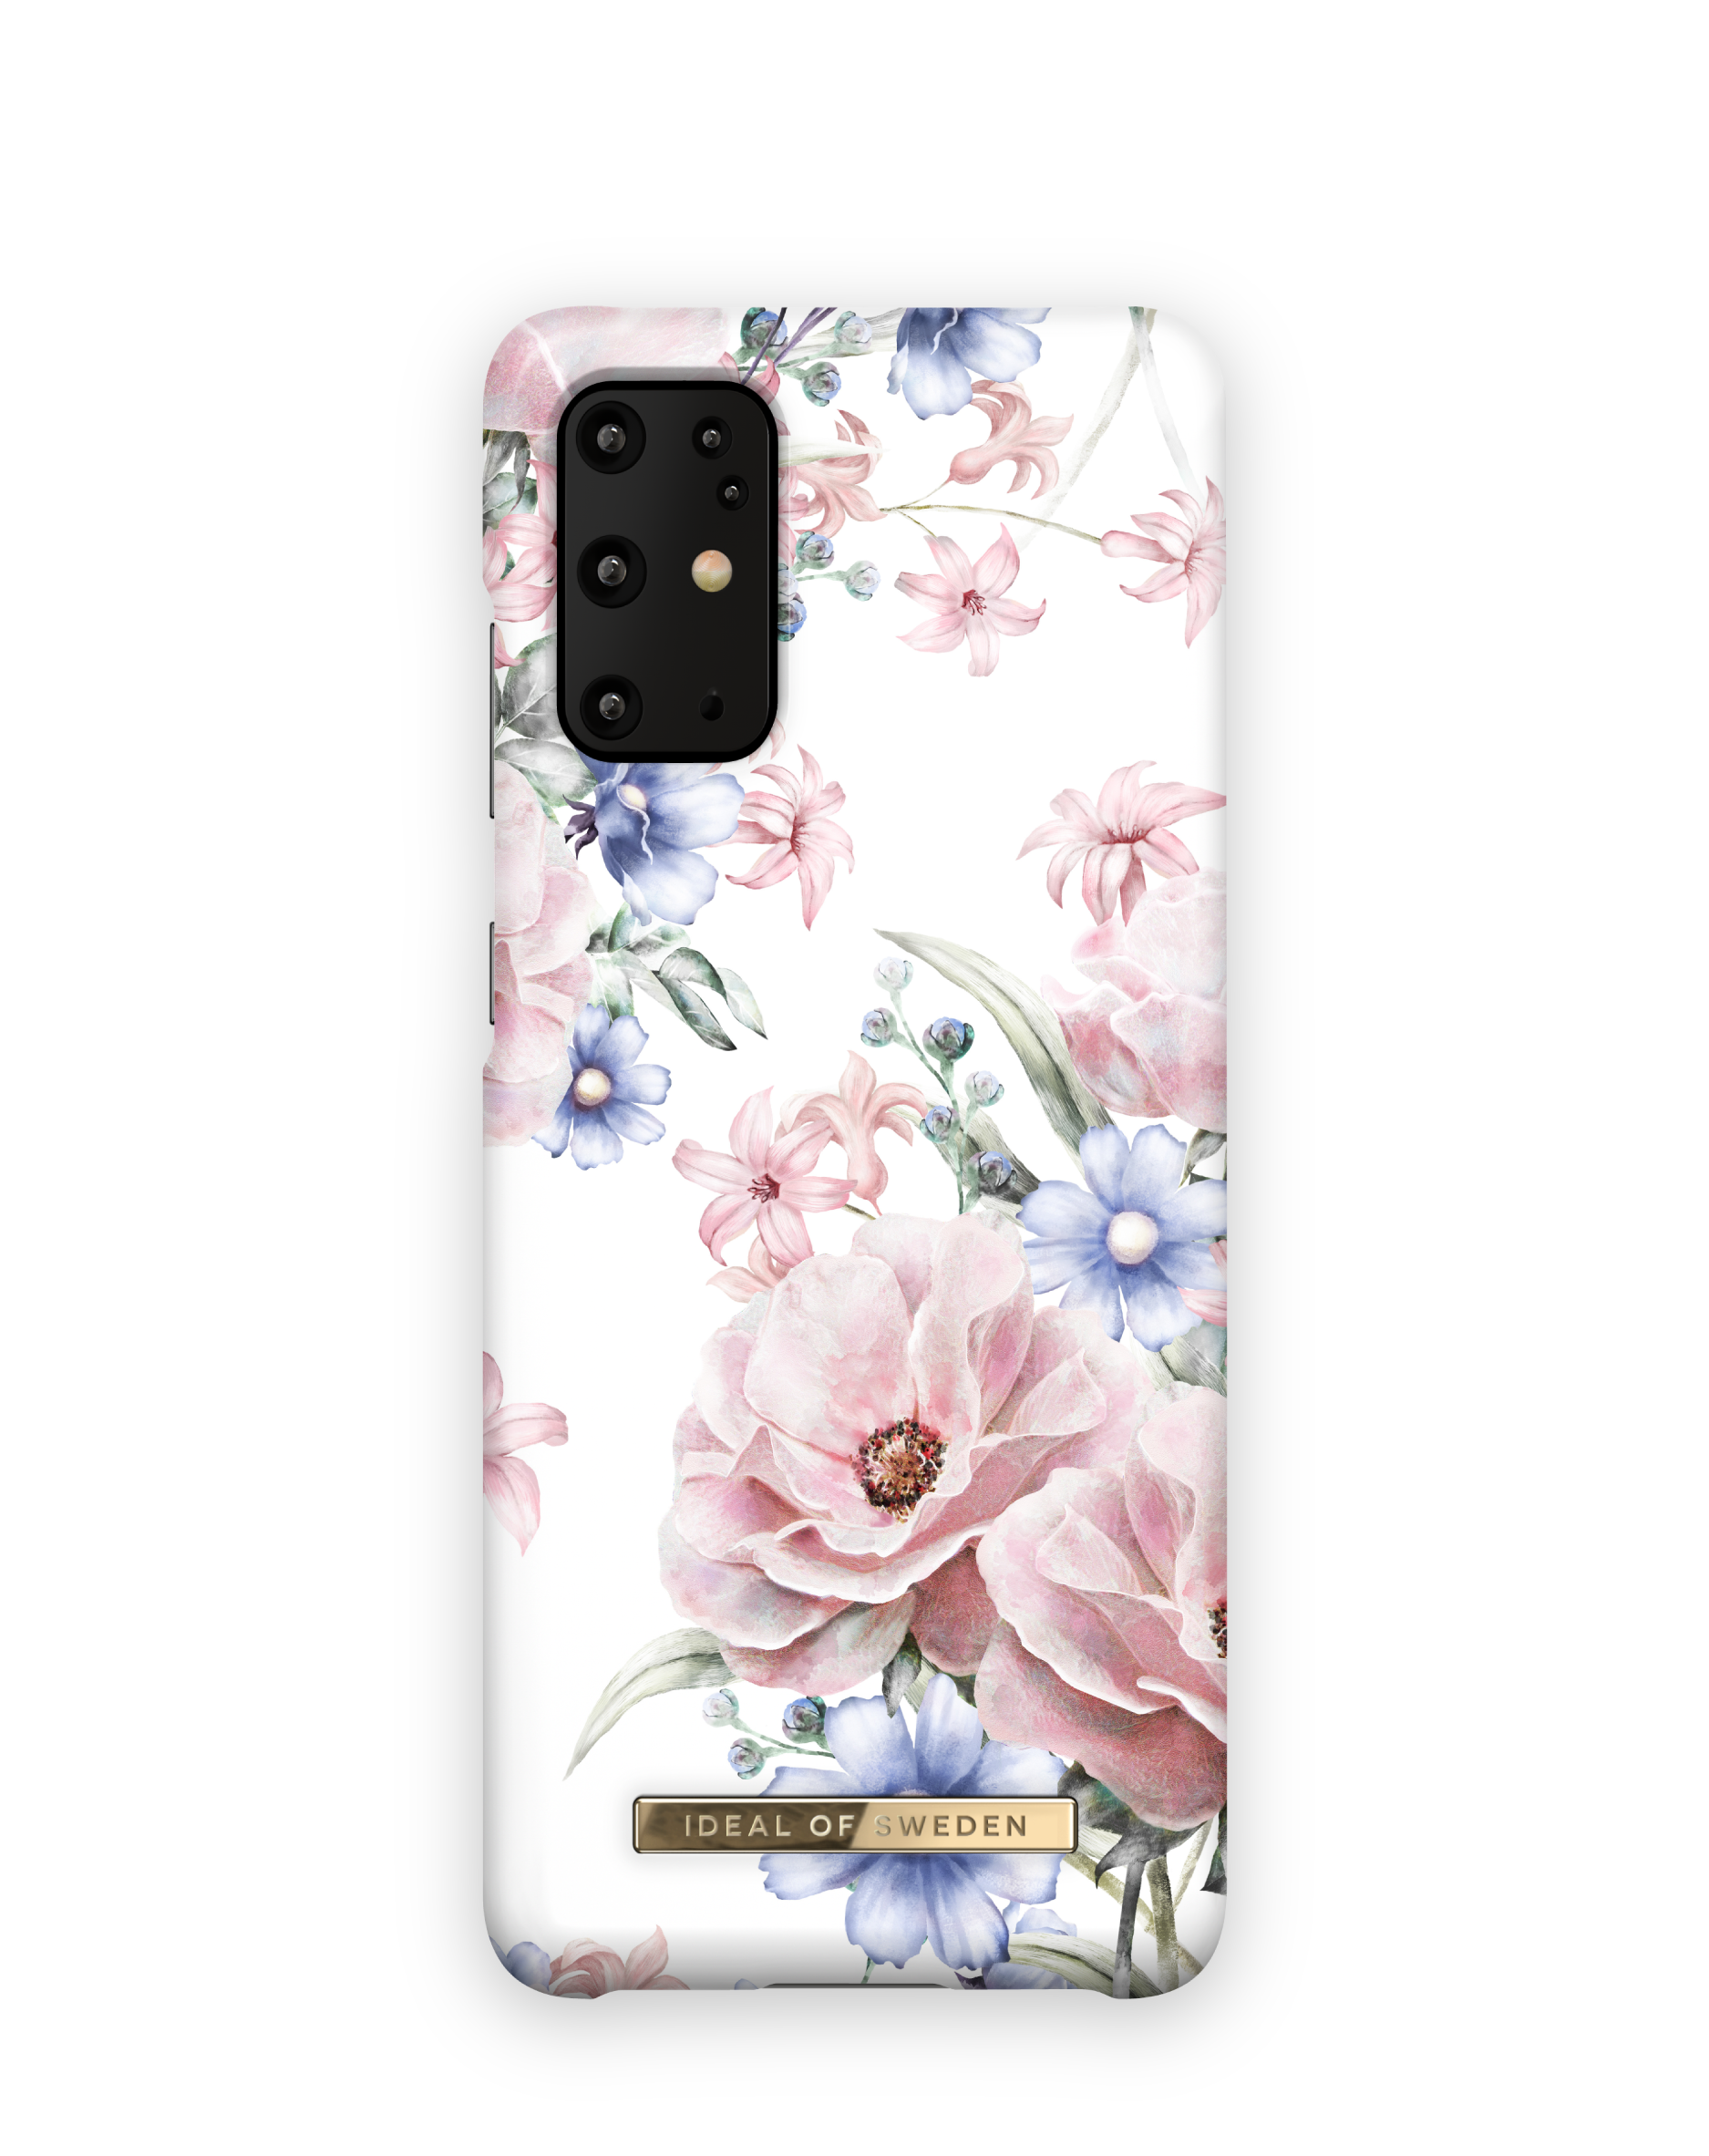 IDEAL OF Backcover, IDFCS17-S11-58, Galaxy S20+, Samsung, SWEDEN Floral Romance